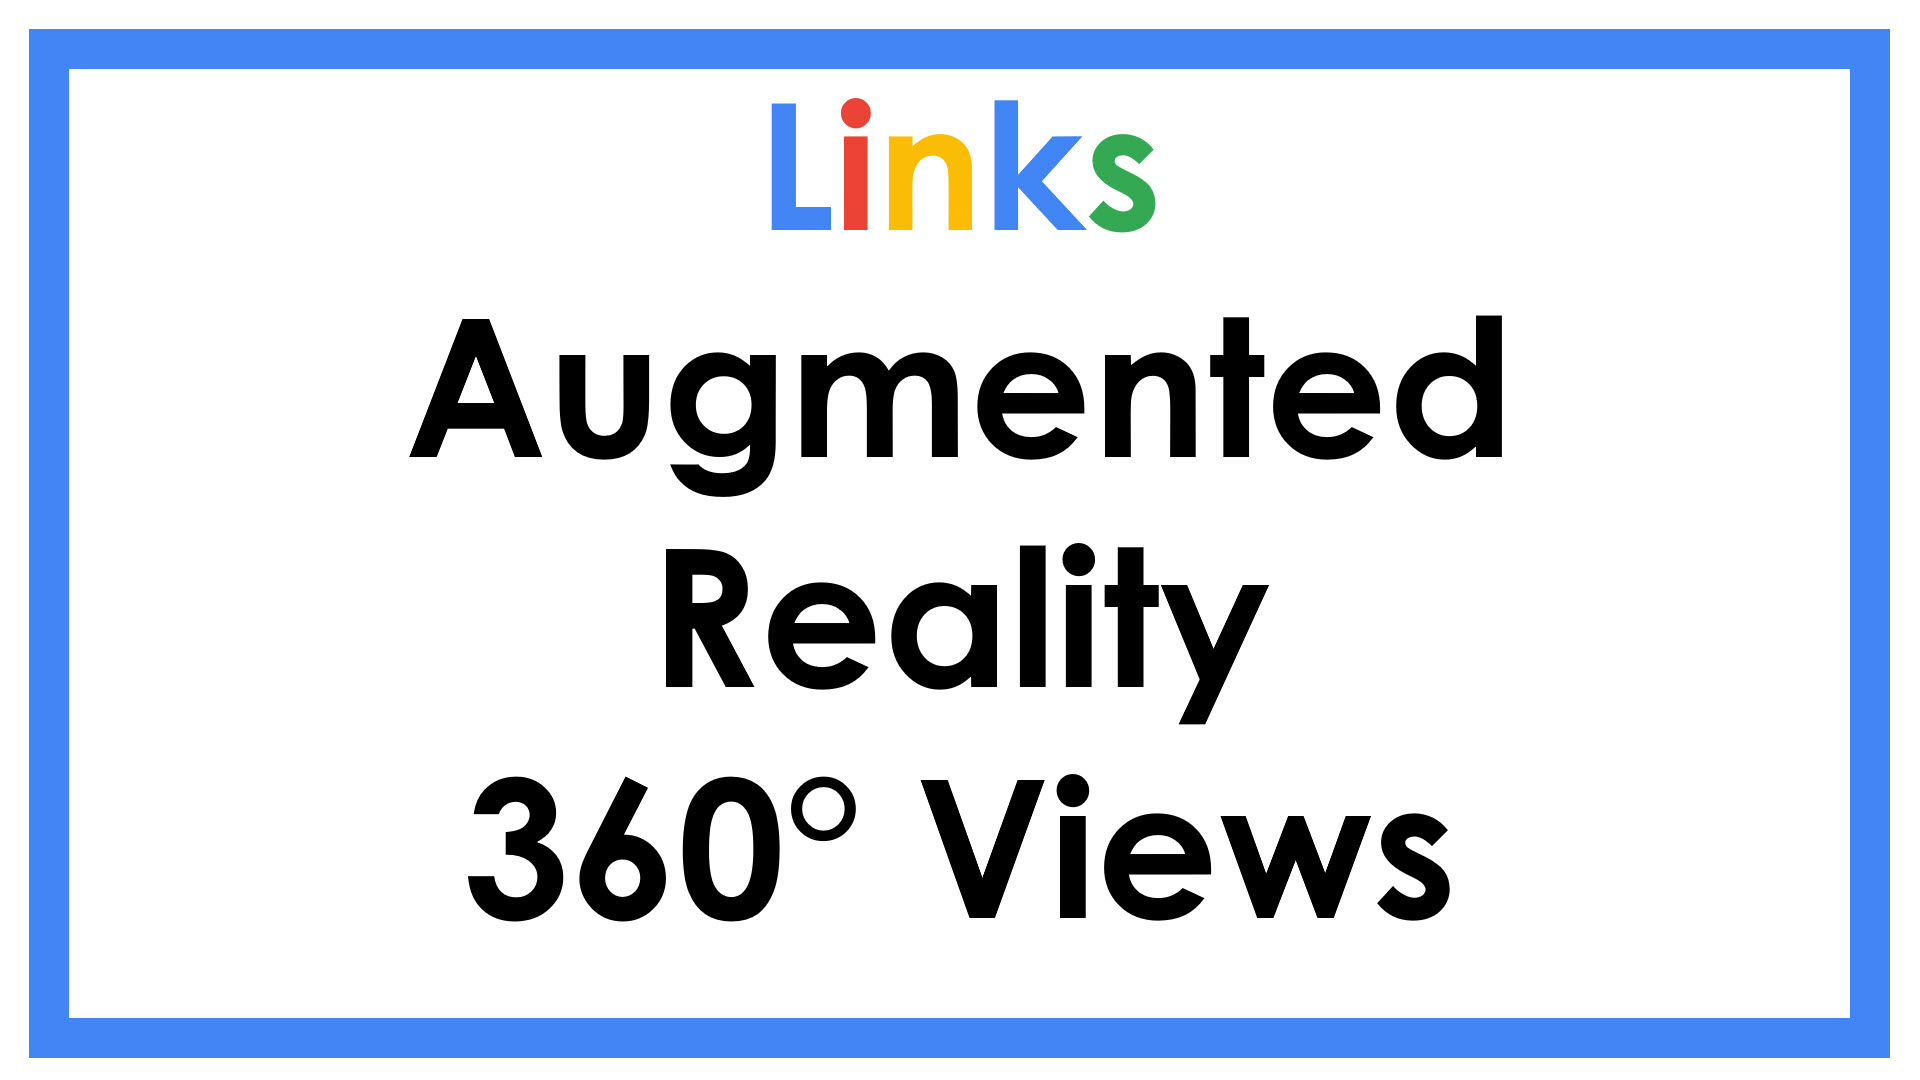 Links Augemented Reality 360 Views